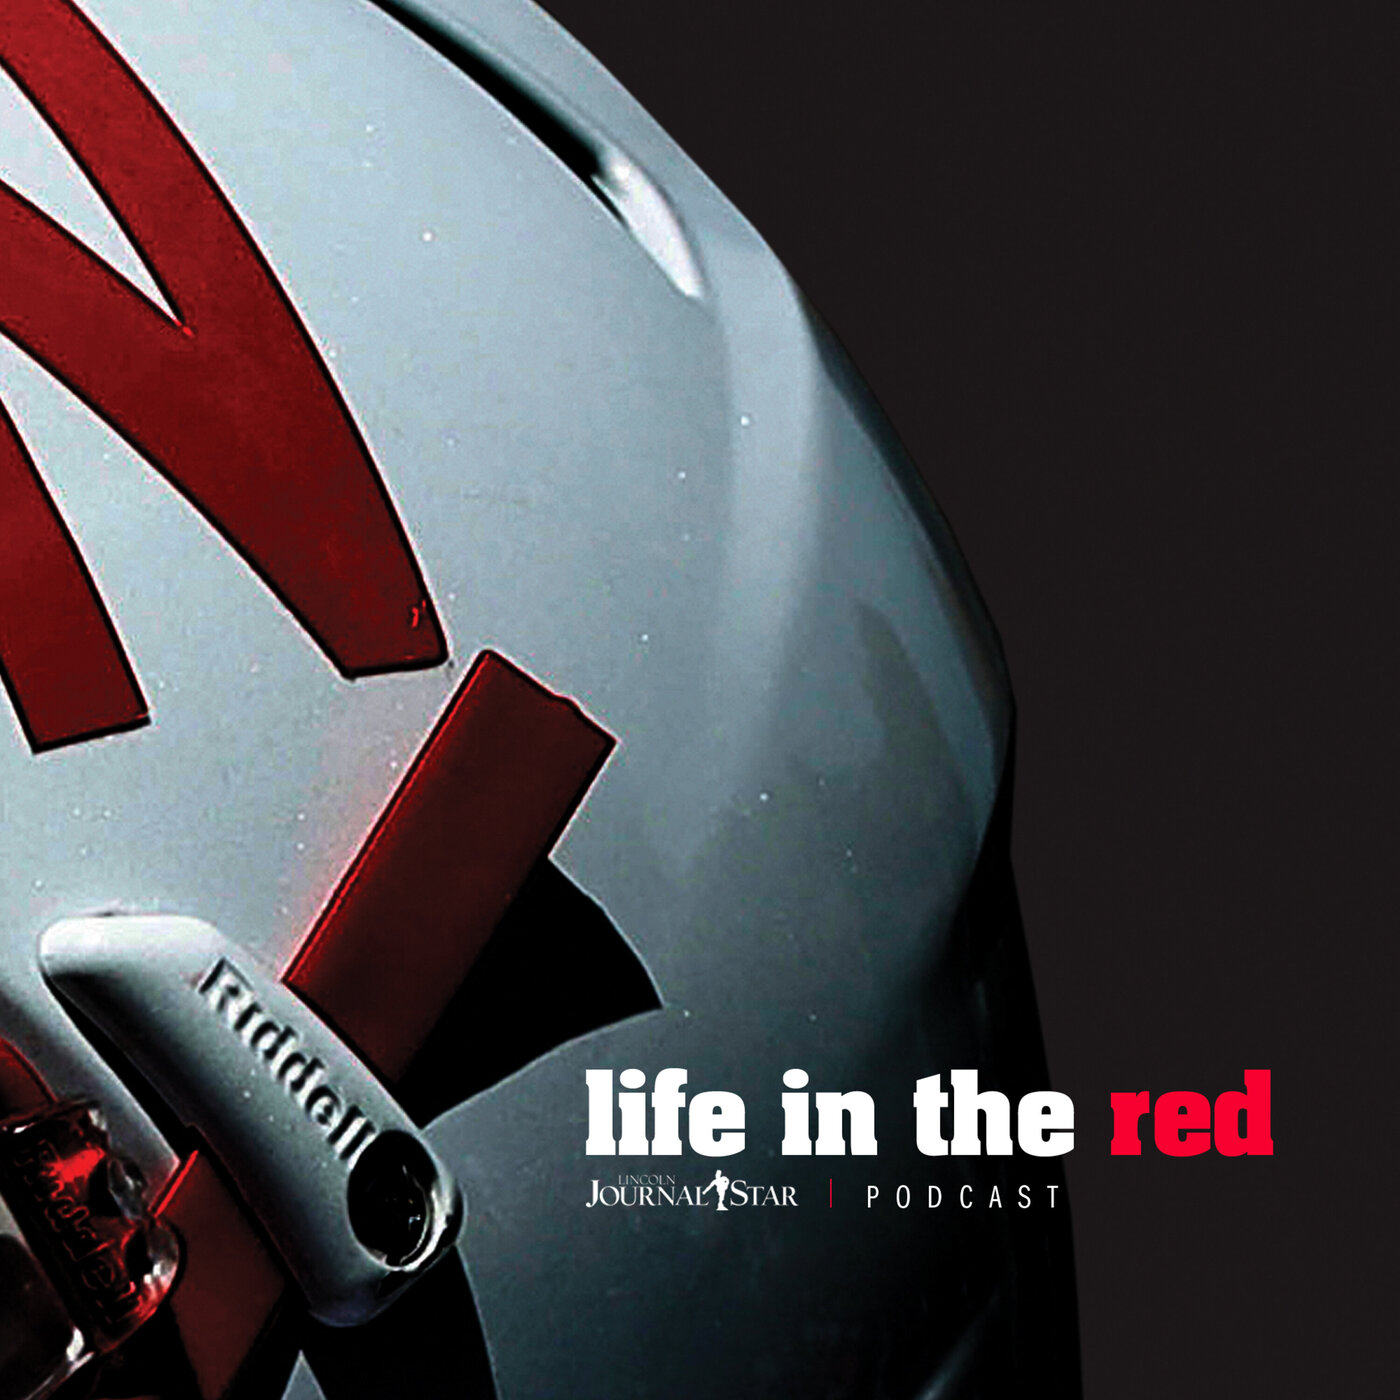 Life in the Red Podcast: What’s in store for Nebraska in 2023?